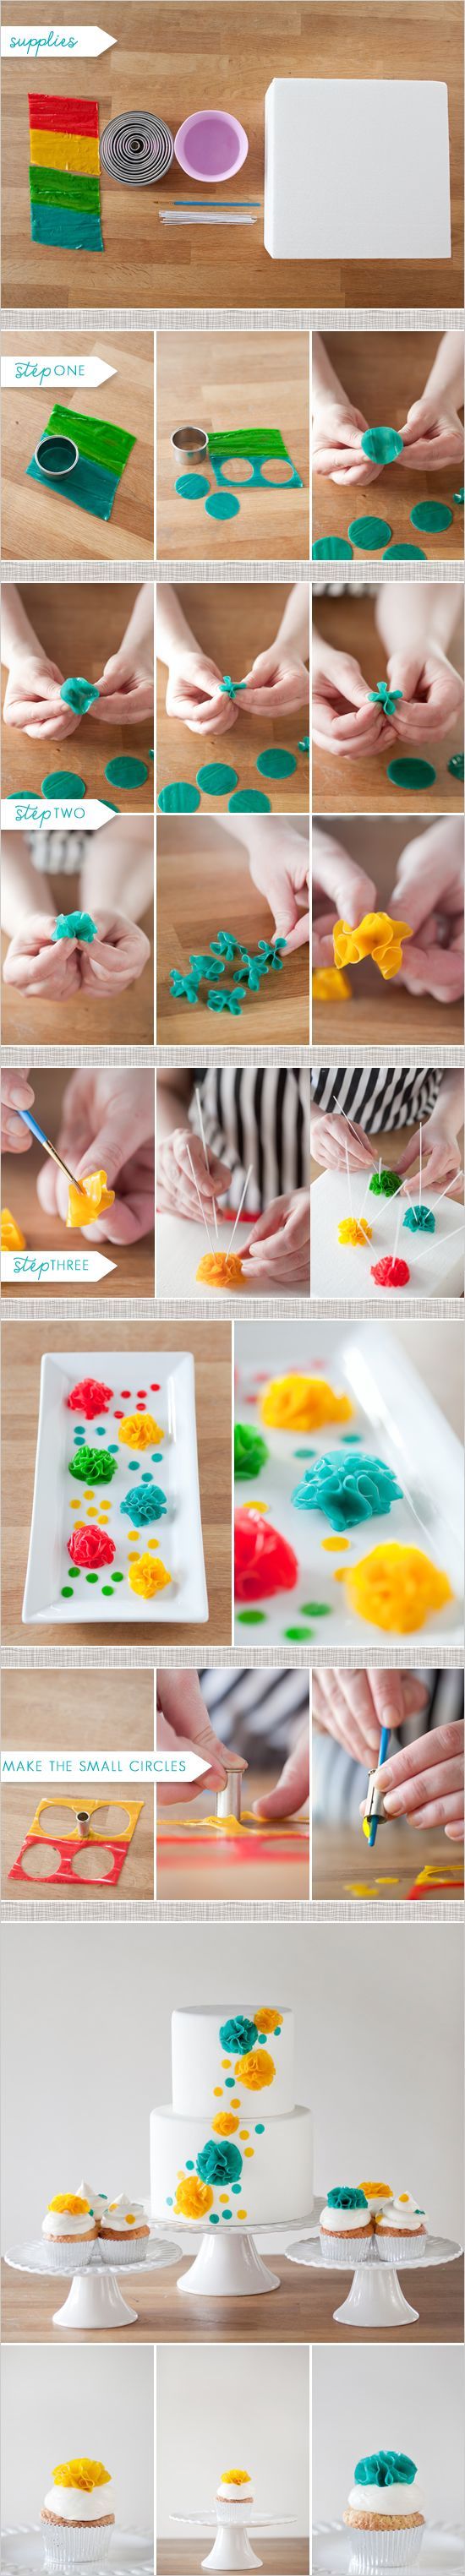 Decorate a cake with fruit roll-ups!  This simple tutorial turns a plain cake in